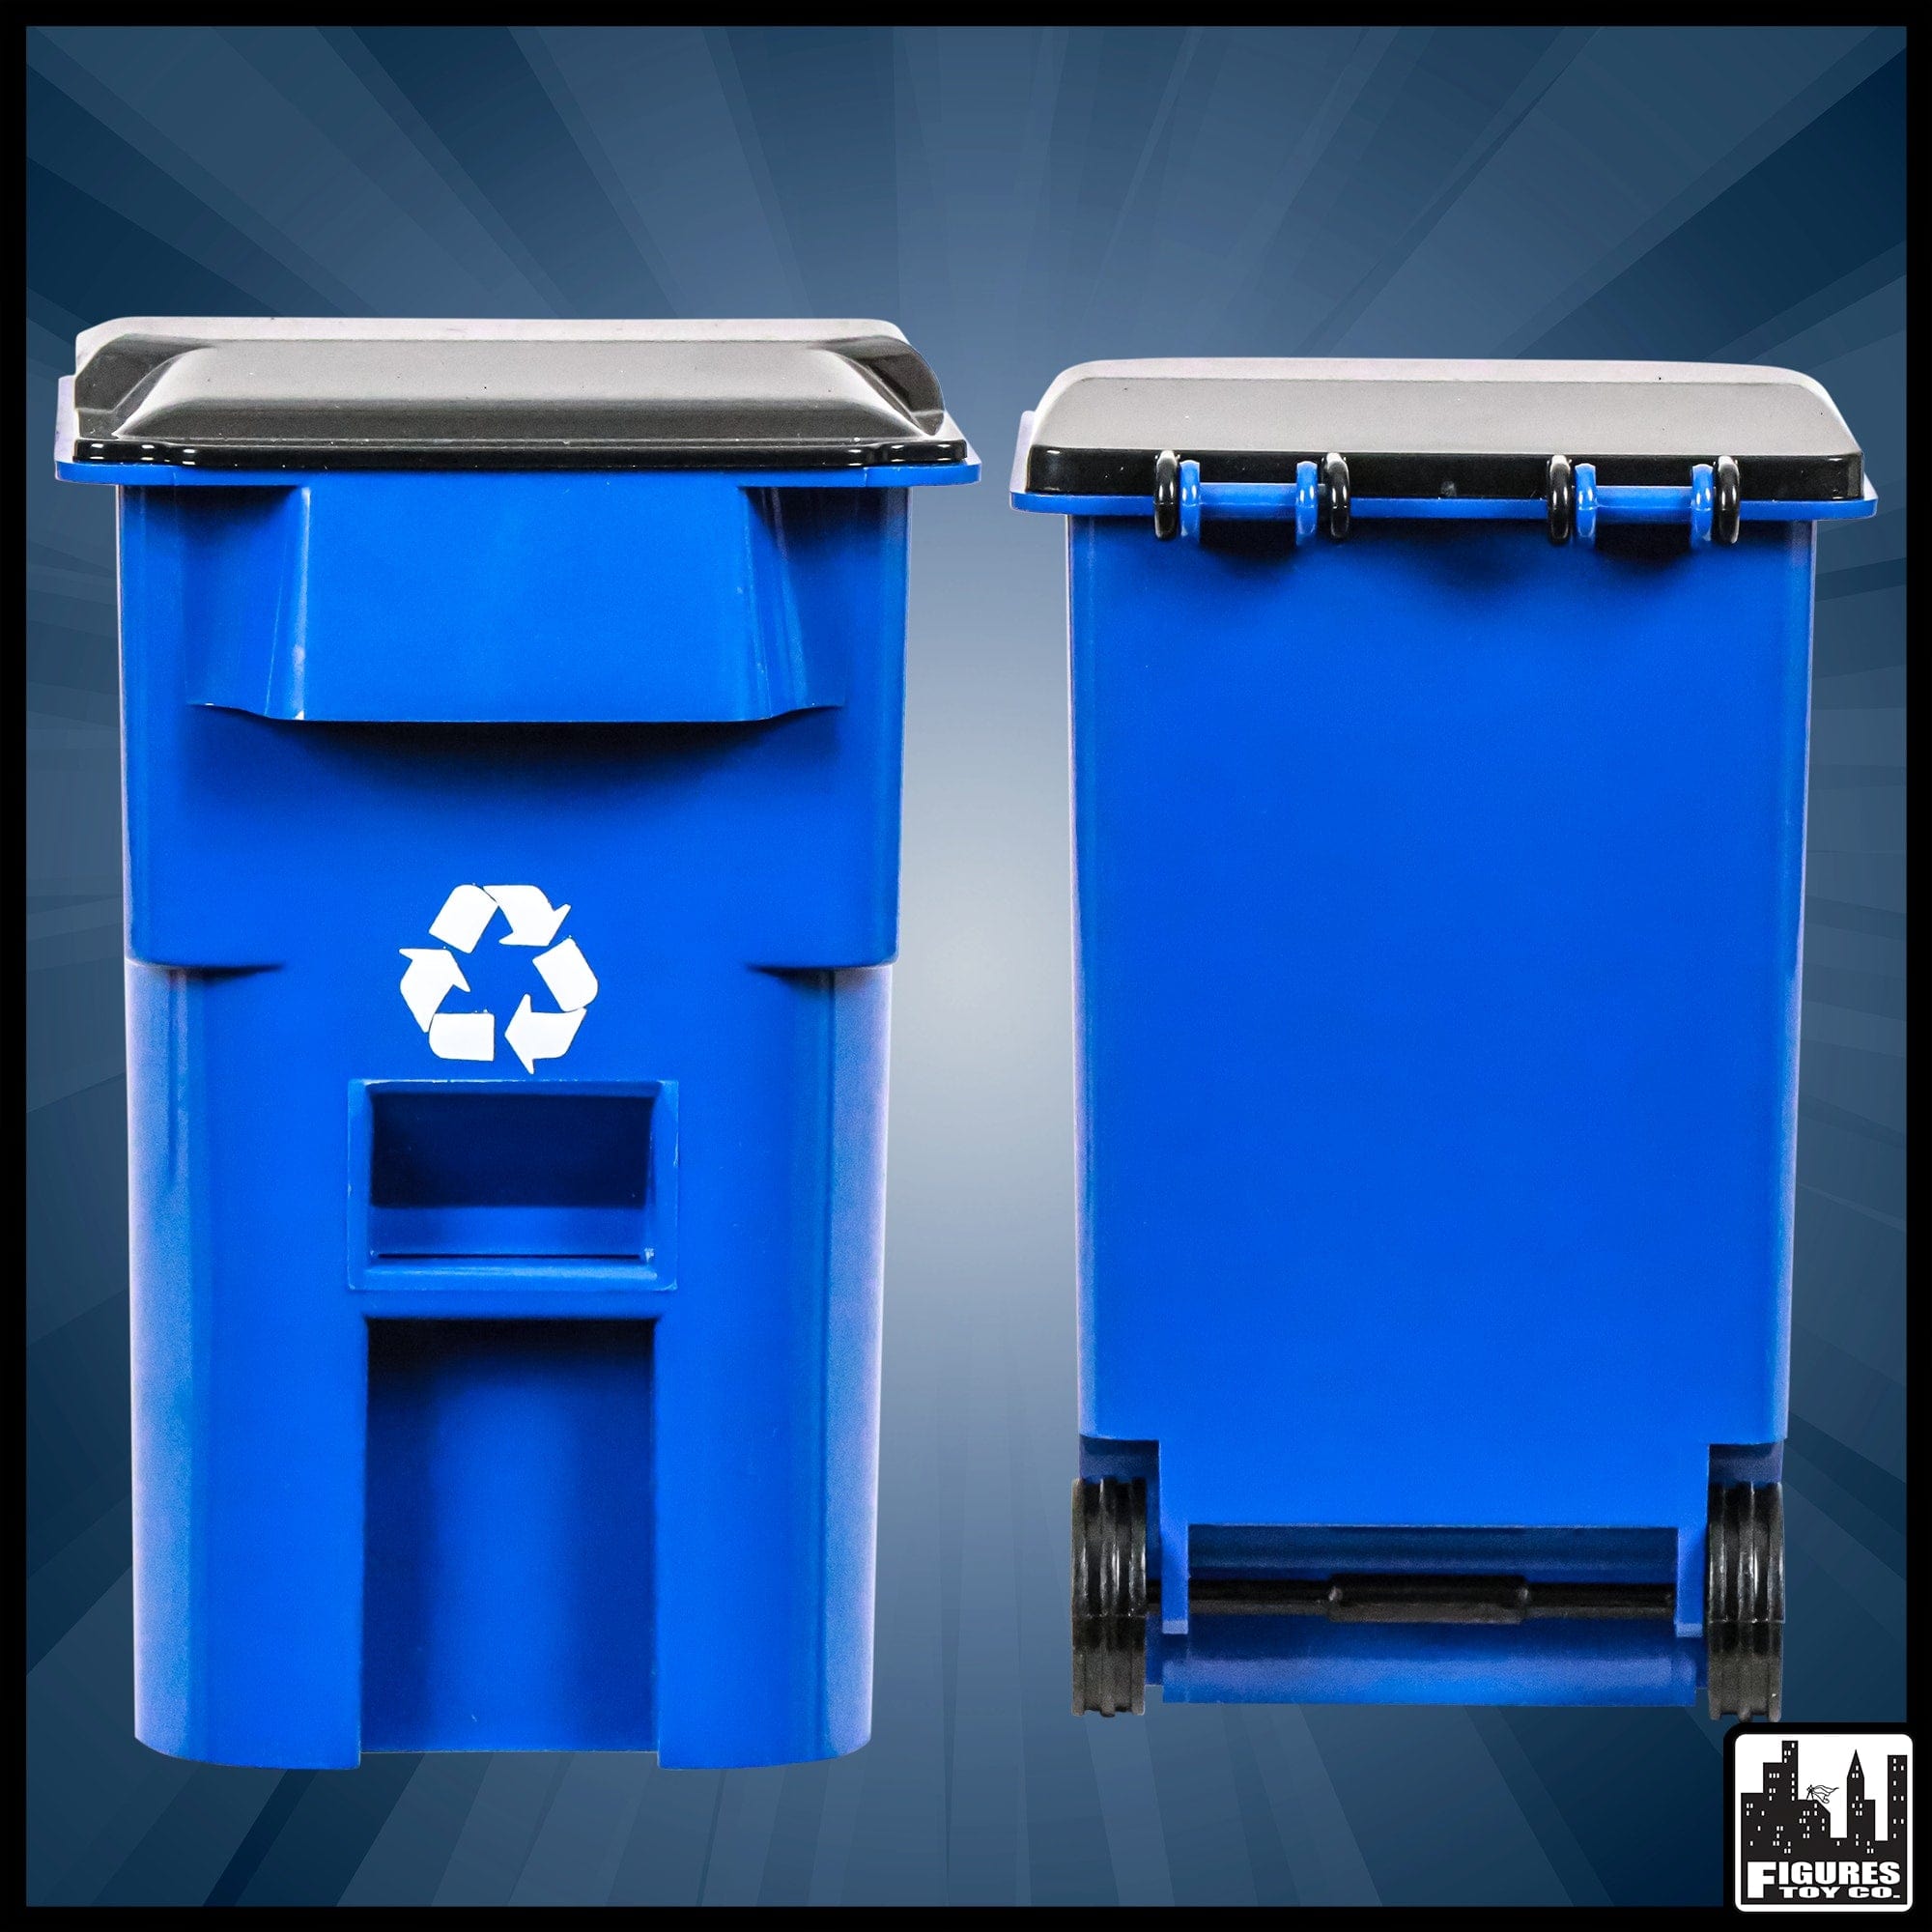 Toter 96 Gallon Plastic Garbage Can Blue with Wheels and Lid, Garage 